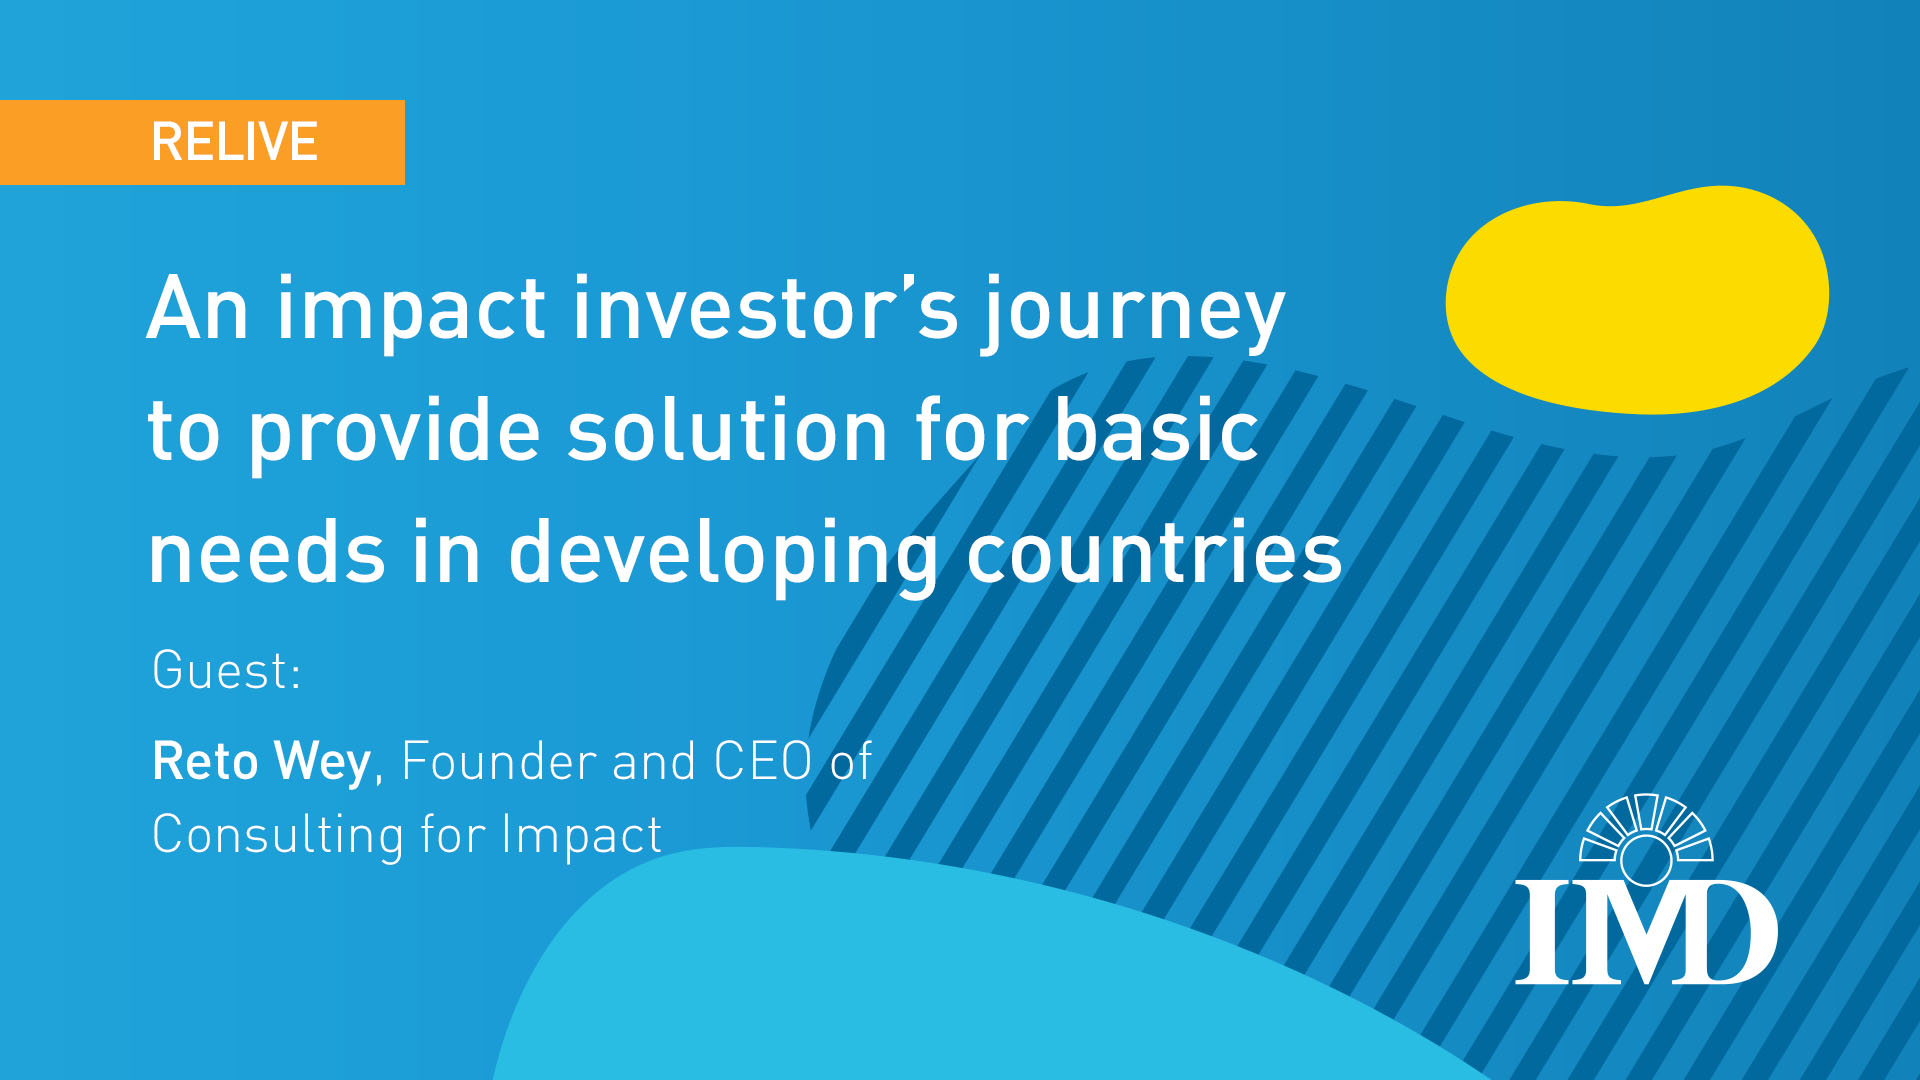 An impact investor’s journey to provide solutions for basic needs in developing countries